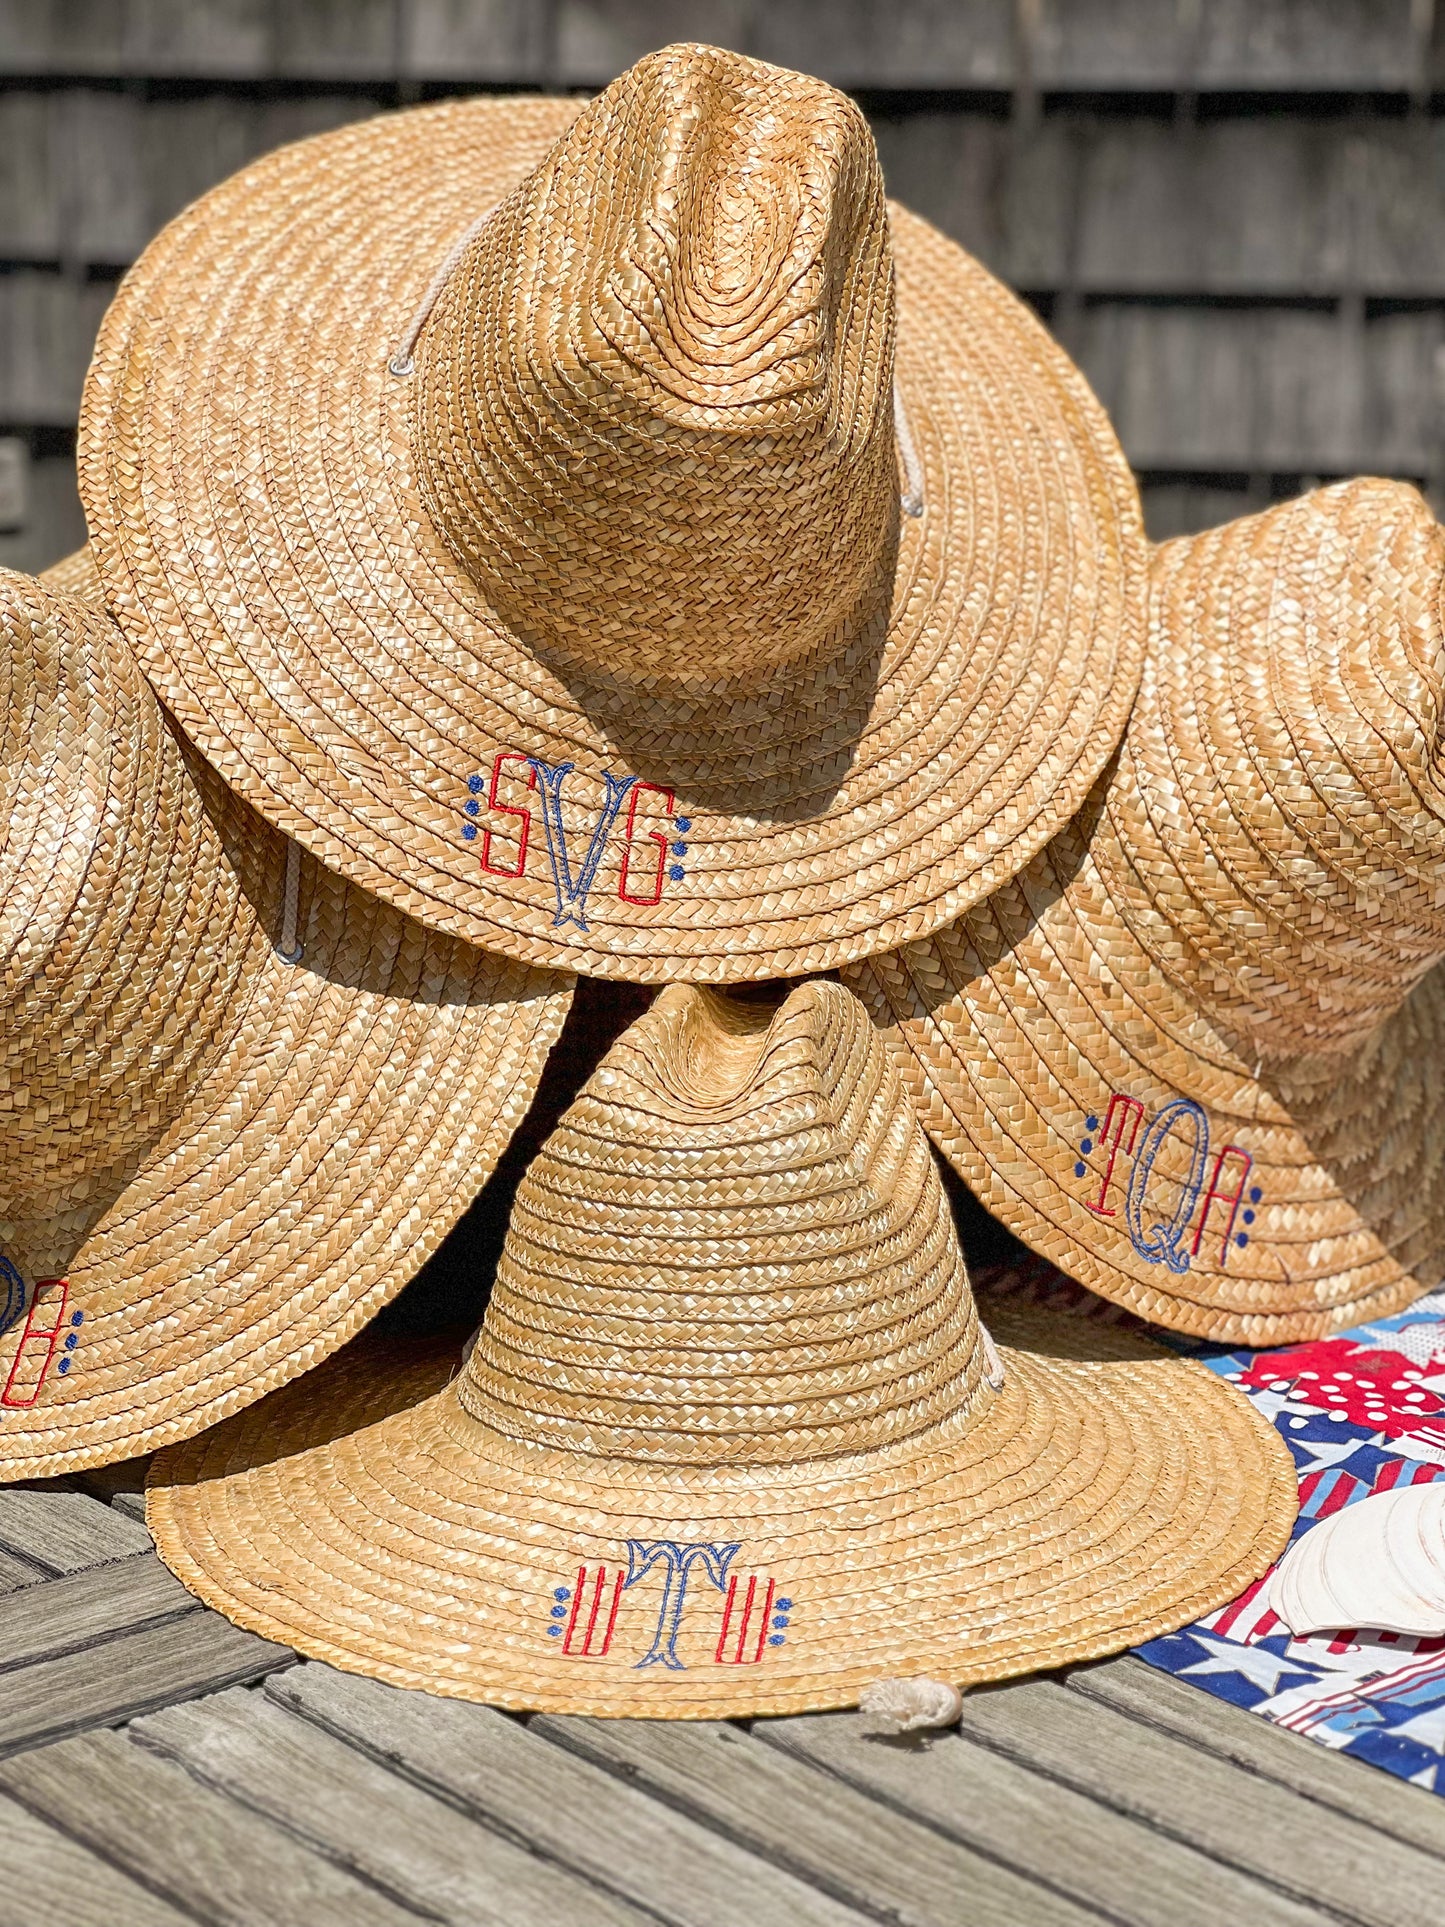 The Ultimate Summer Hat